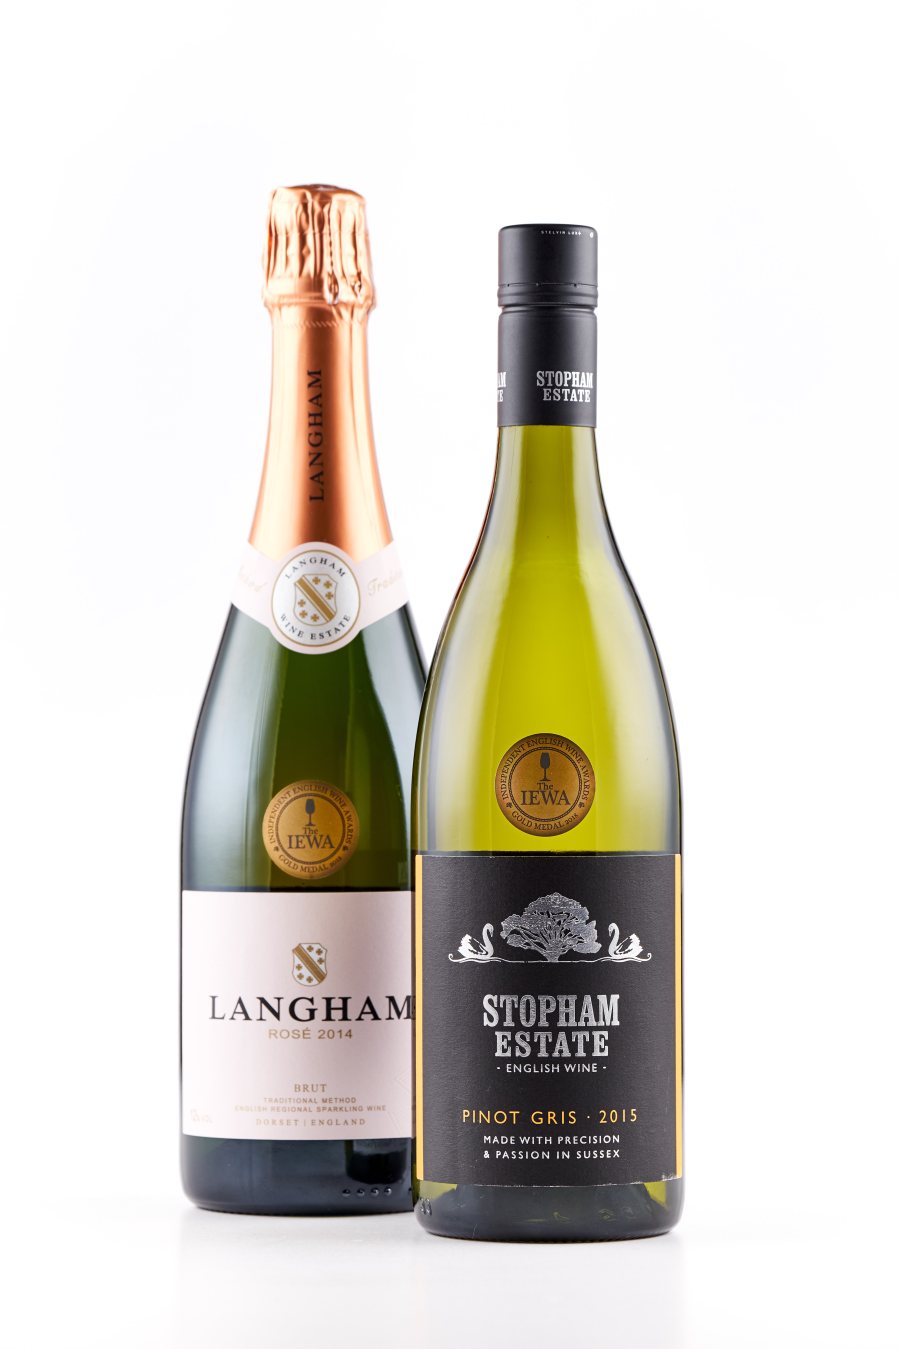 Stopham and Langham wines